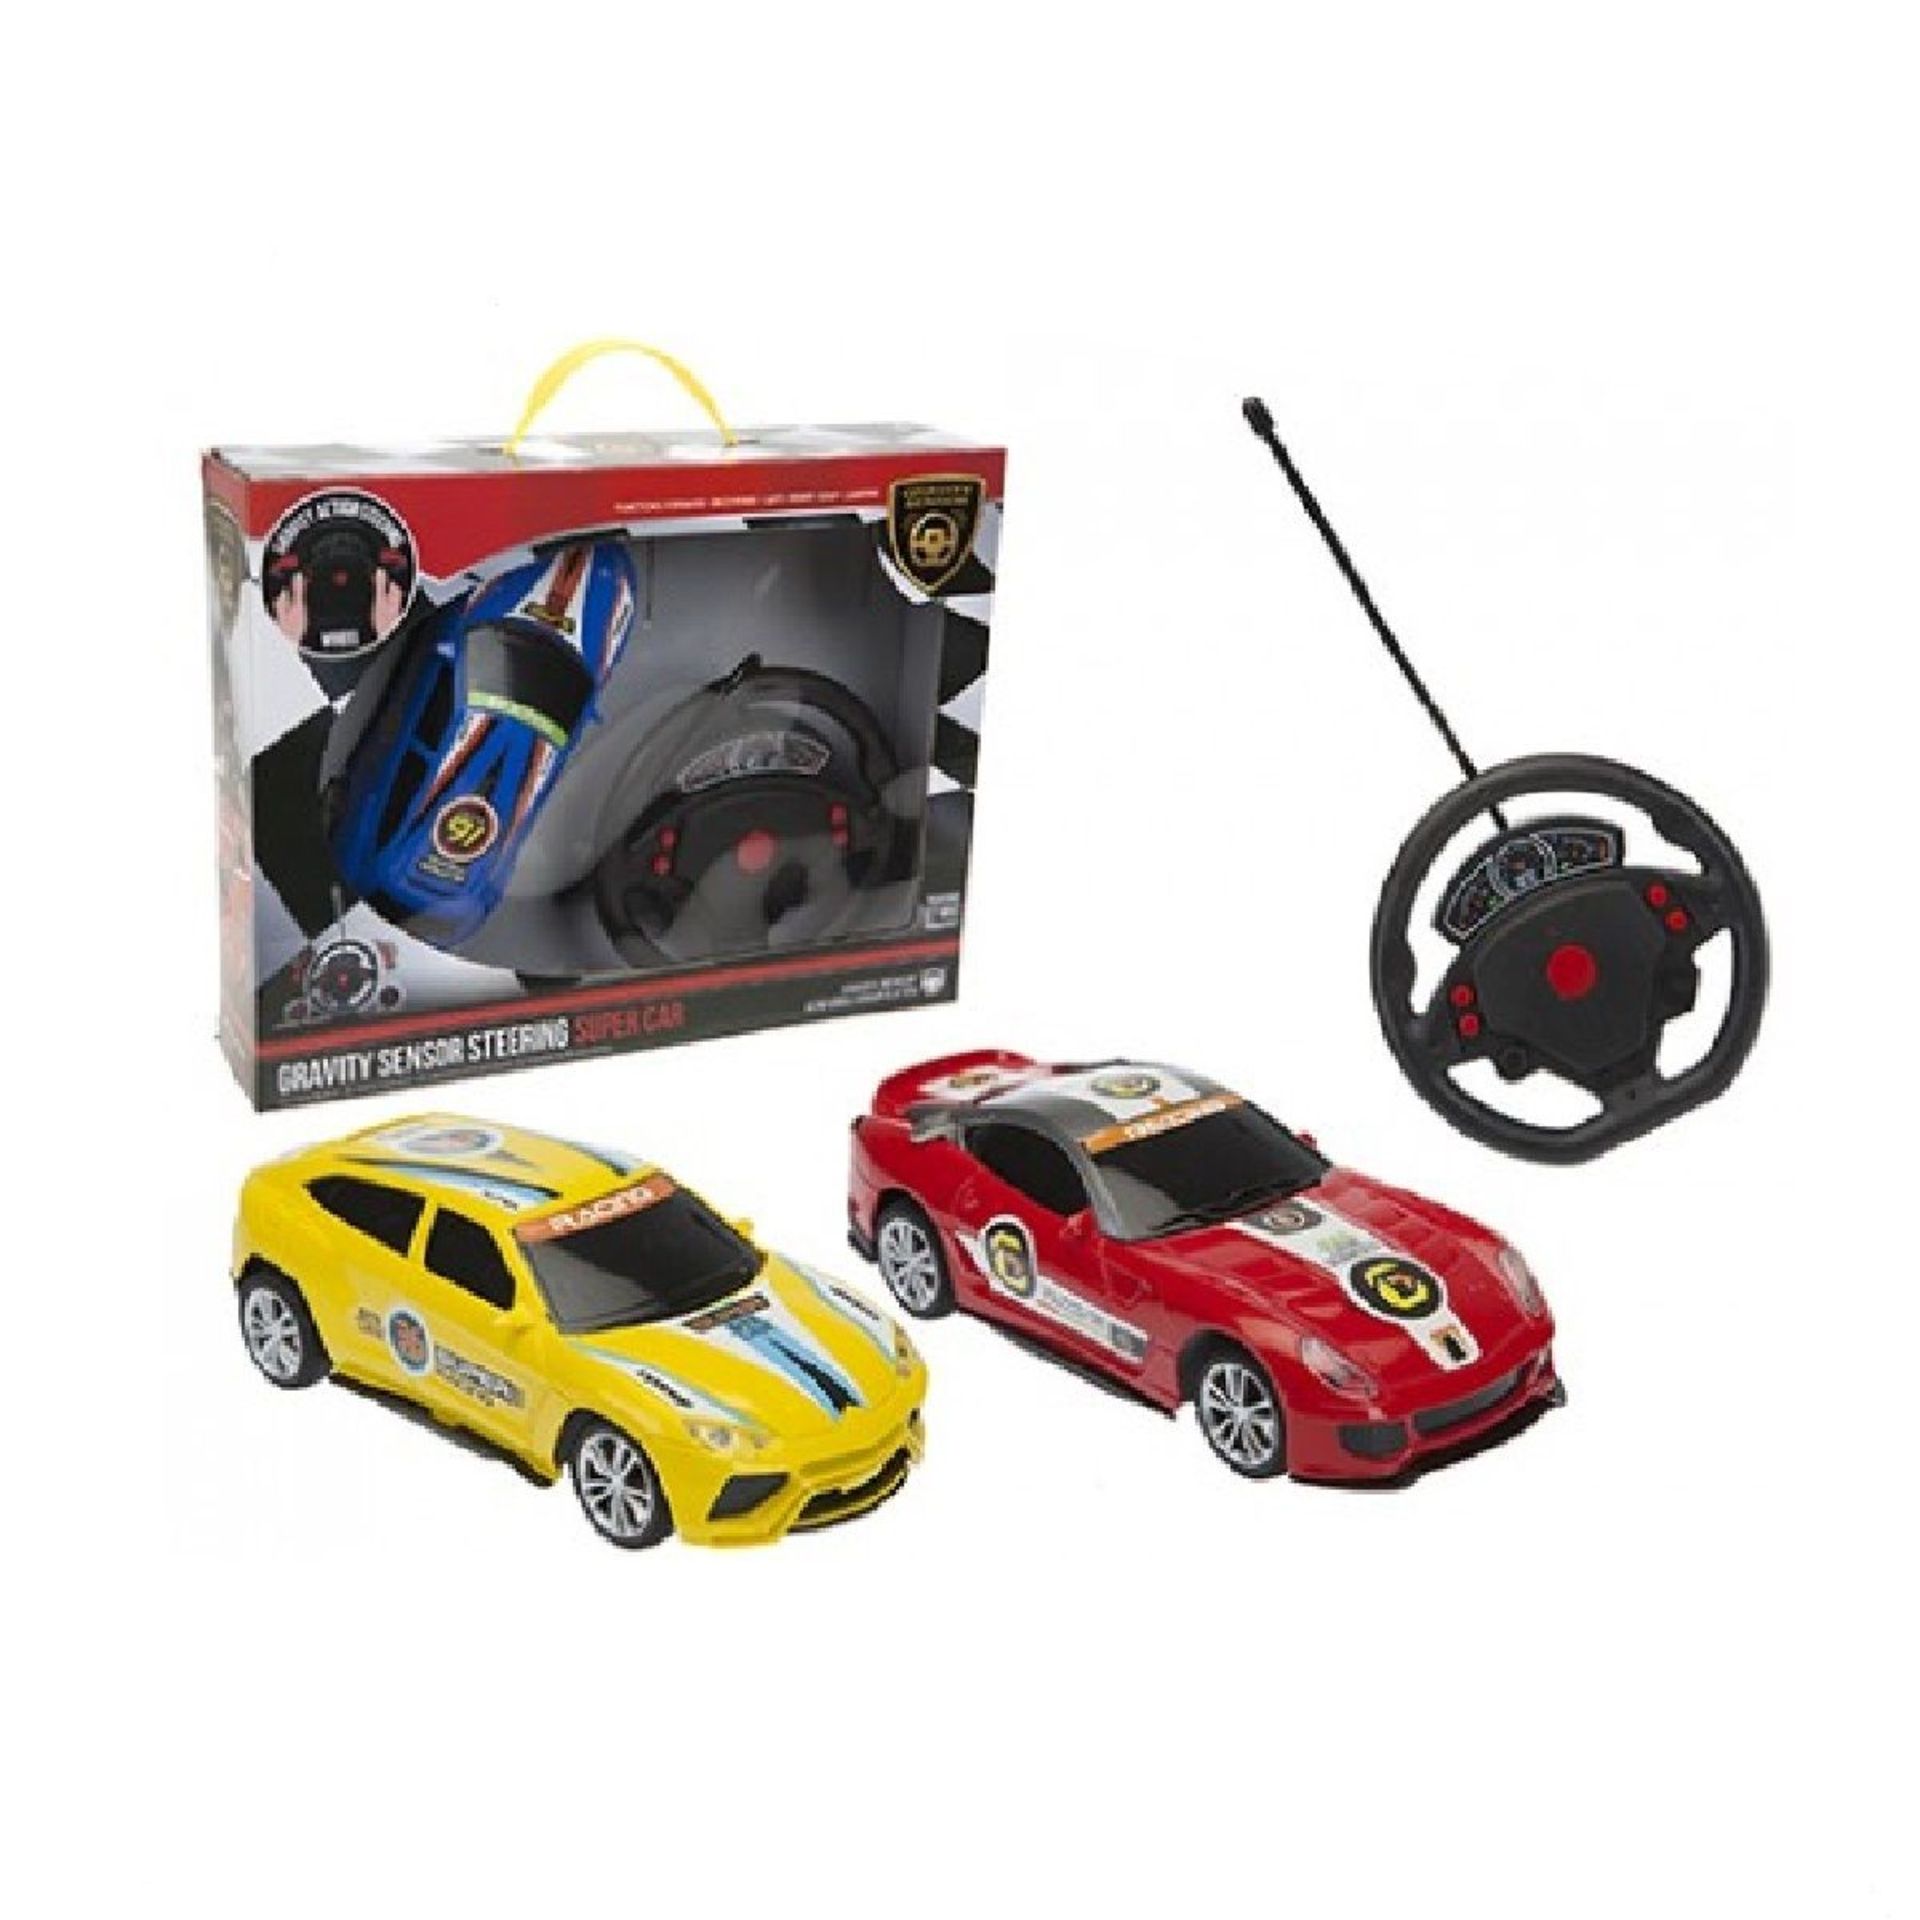 V *TRADE QTY* Brand New Remote Control Gravity Sensor Steering Sports Car With Lights and Steering